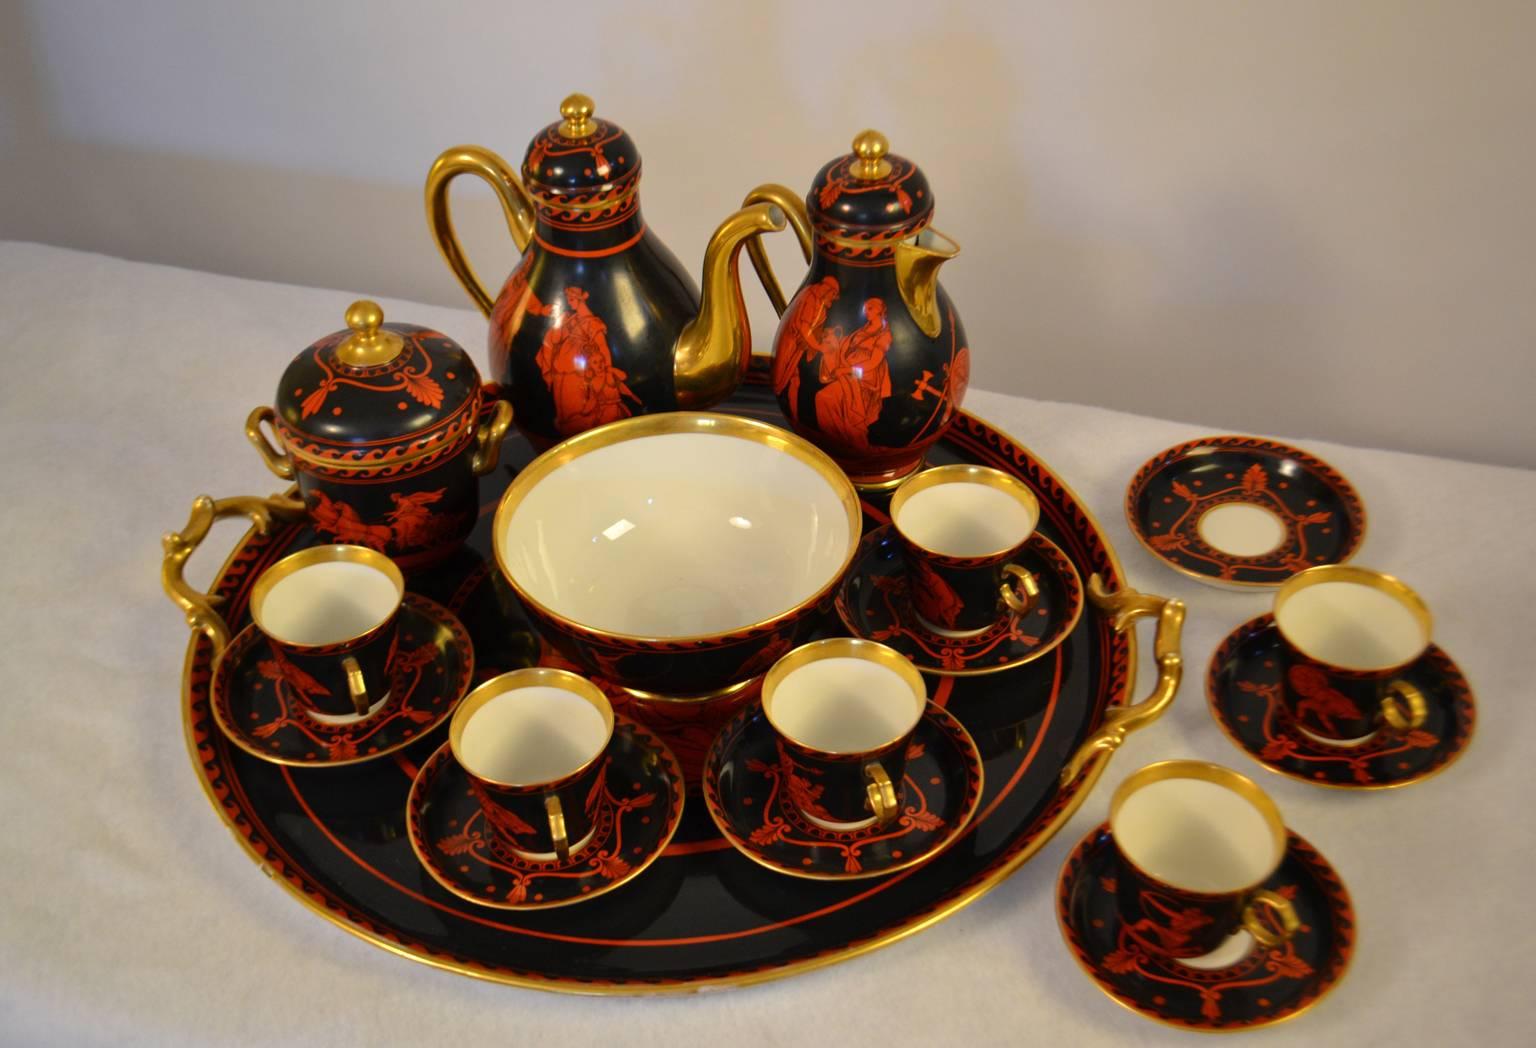 A mid to late 19th century Etruscan style red, black, and gilt porcelain coffee service, marked Fischer & Mieg, comprising coffee pot, milk jug, waste bowl, six cups, and seven saucers, and a tray, decorated with Classical figures, Athenia and